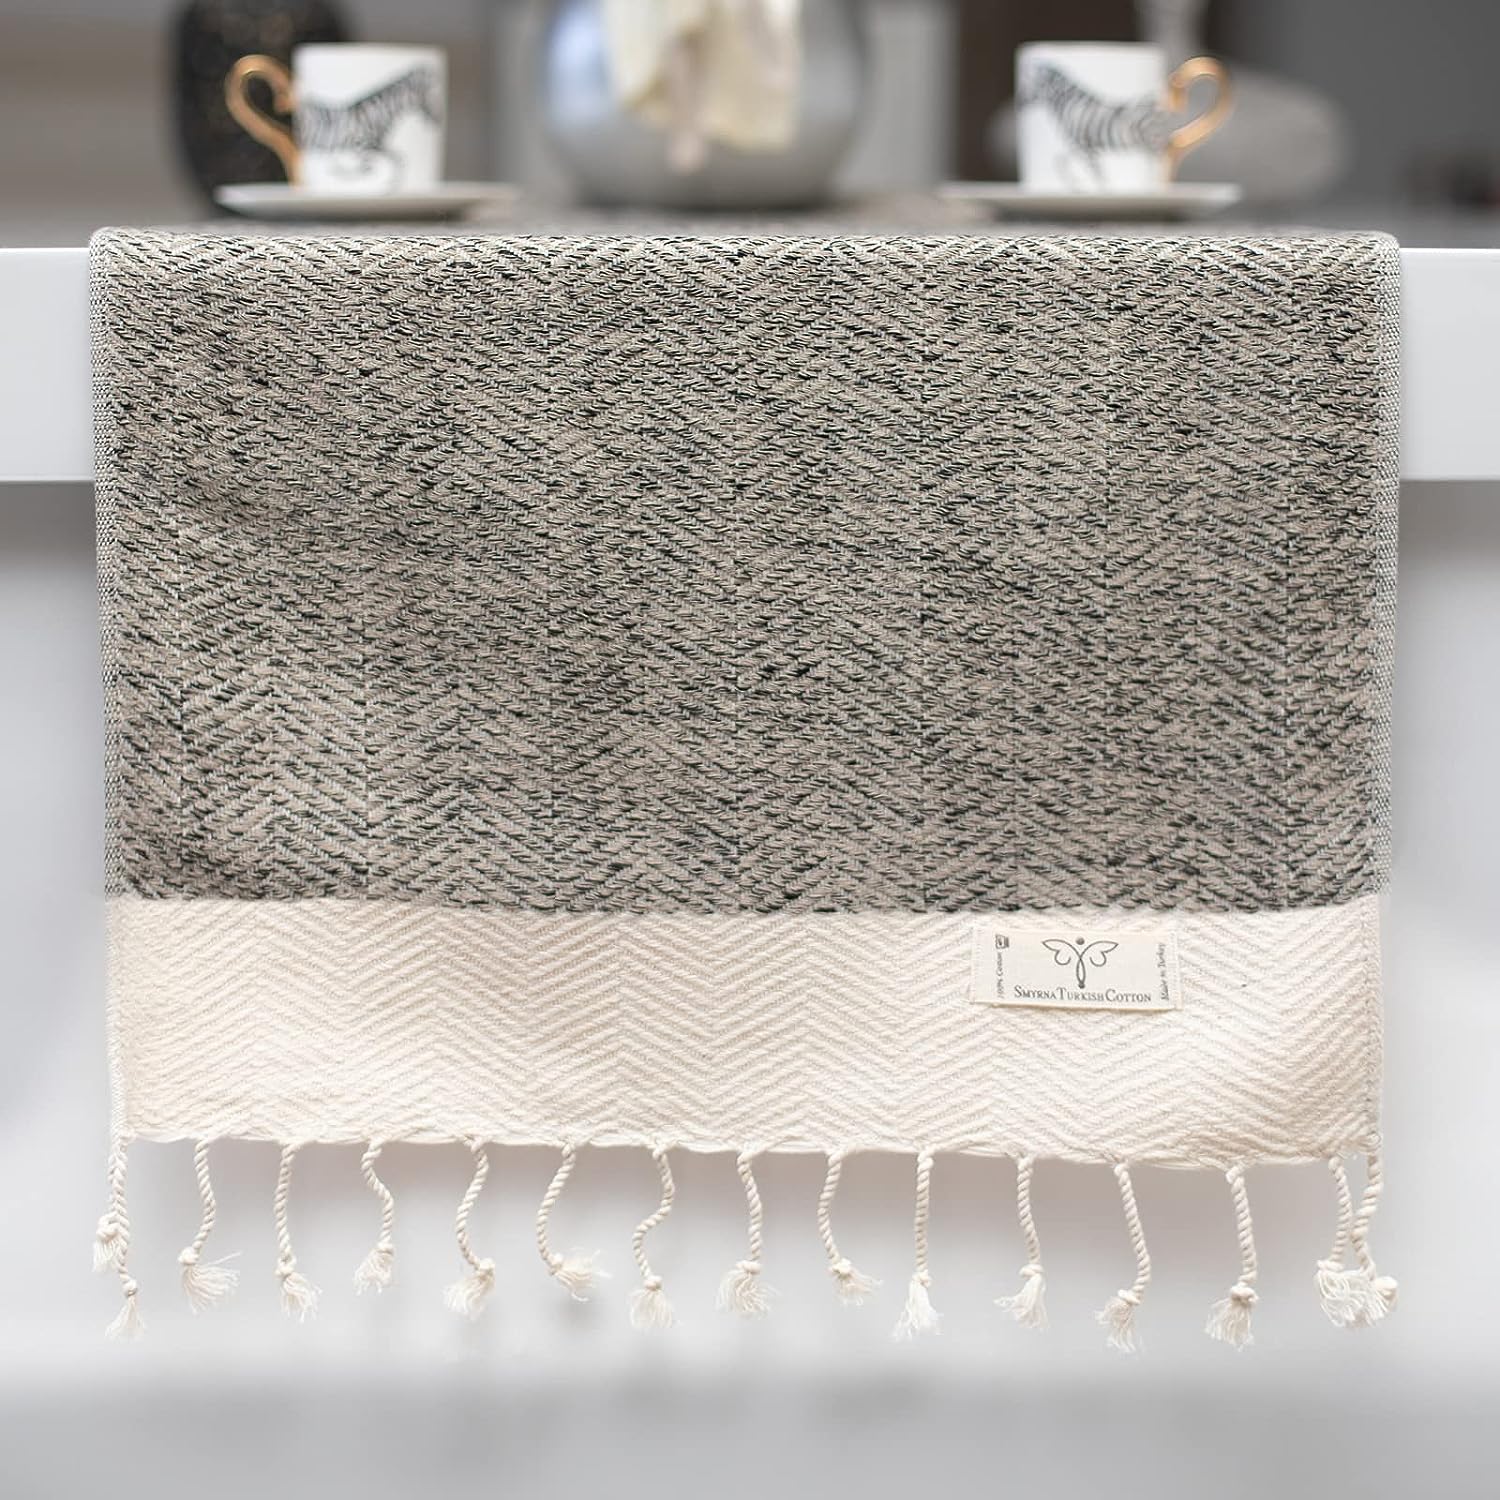 Smyrna Turkish Cotton Herringbone Series Table Runner 100% Cotton|Rectangular Table Cover & Protective Table Cloth|Made in Turkey|Doesn't Shrink| Premium Luxury (Beige, 38 x 182 cm) 1